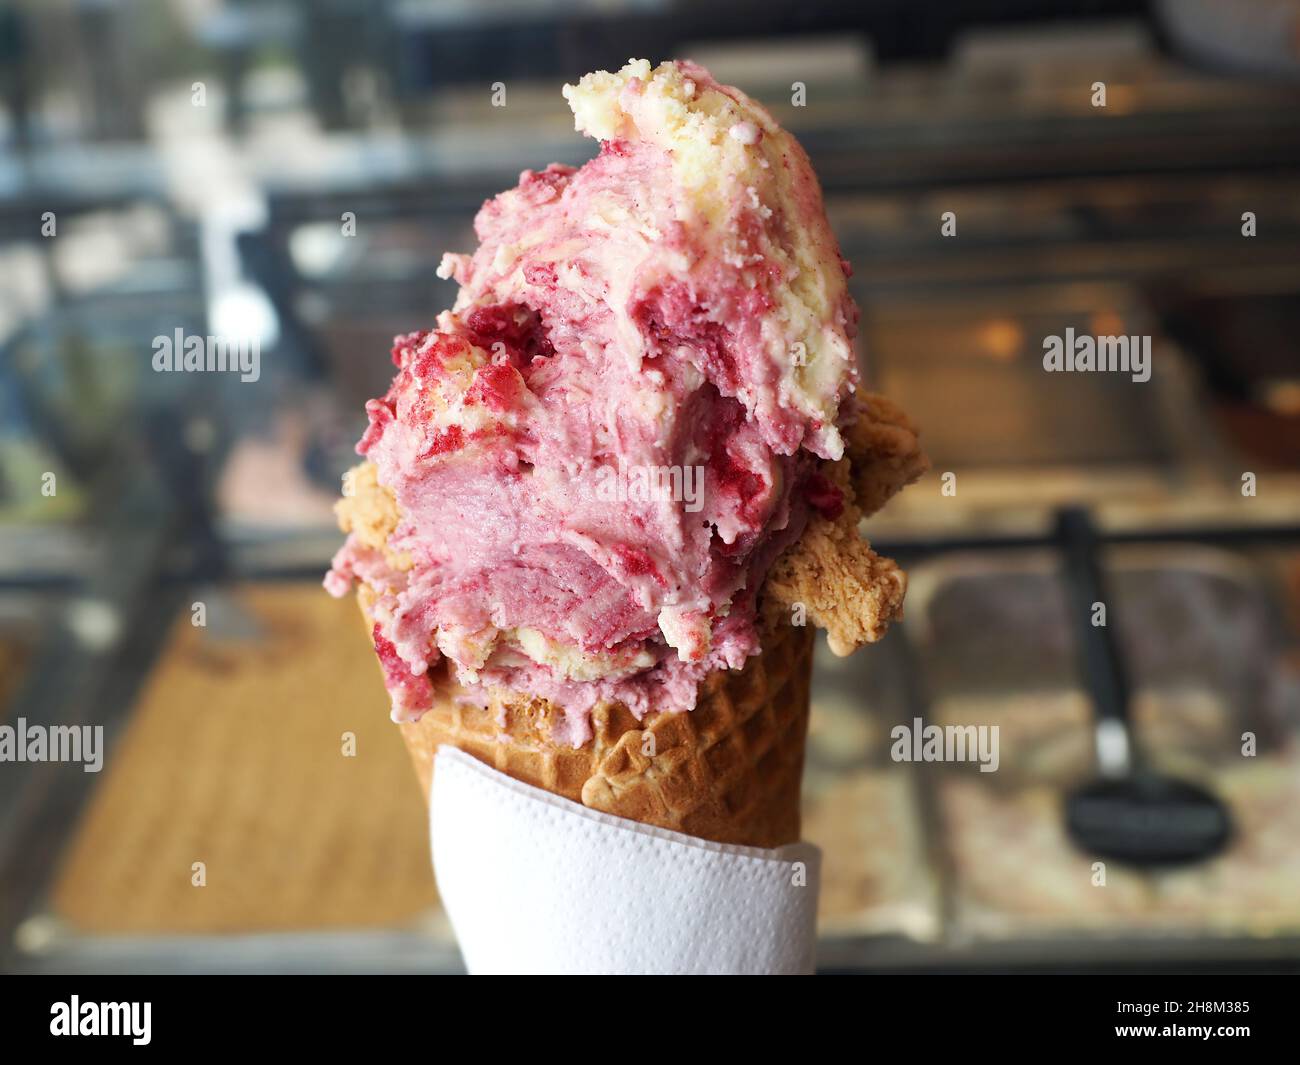 Ice cream in a waffle cup on a blurred background. Stock Photo